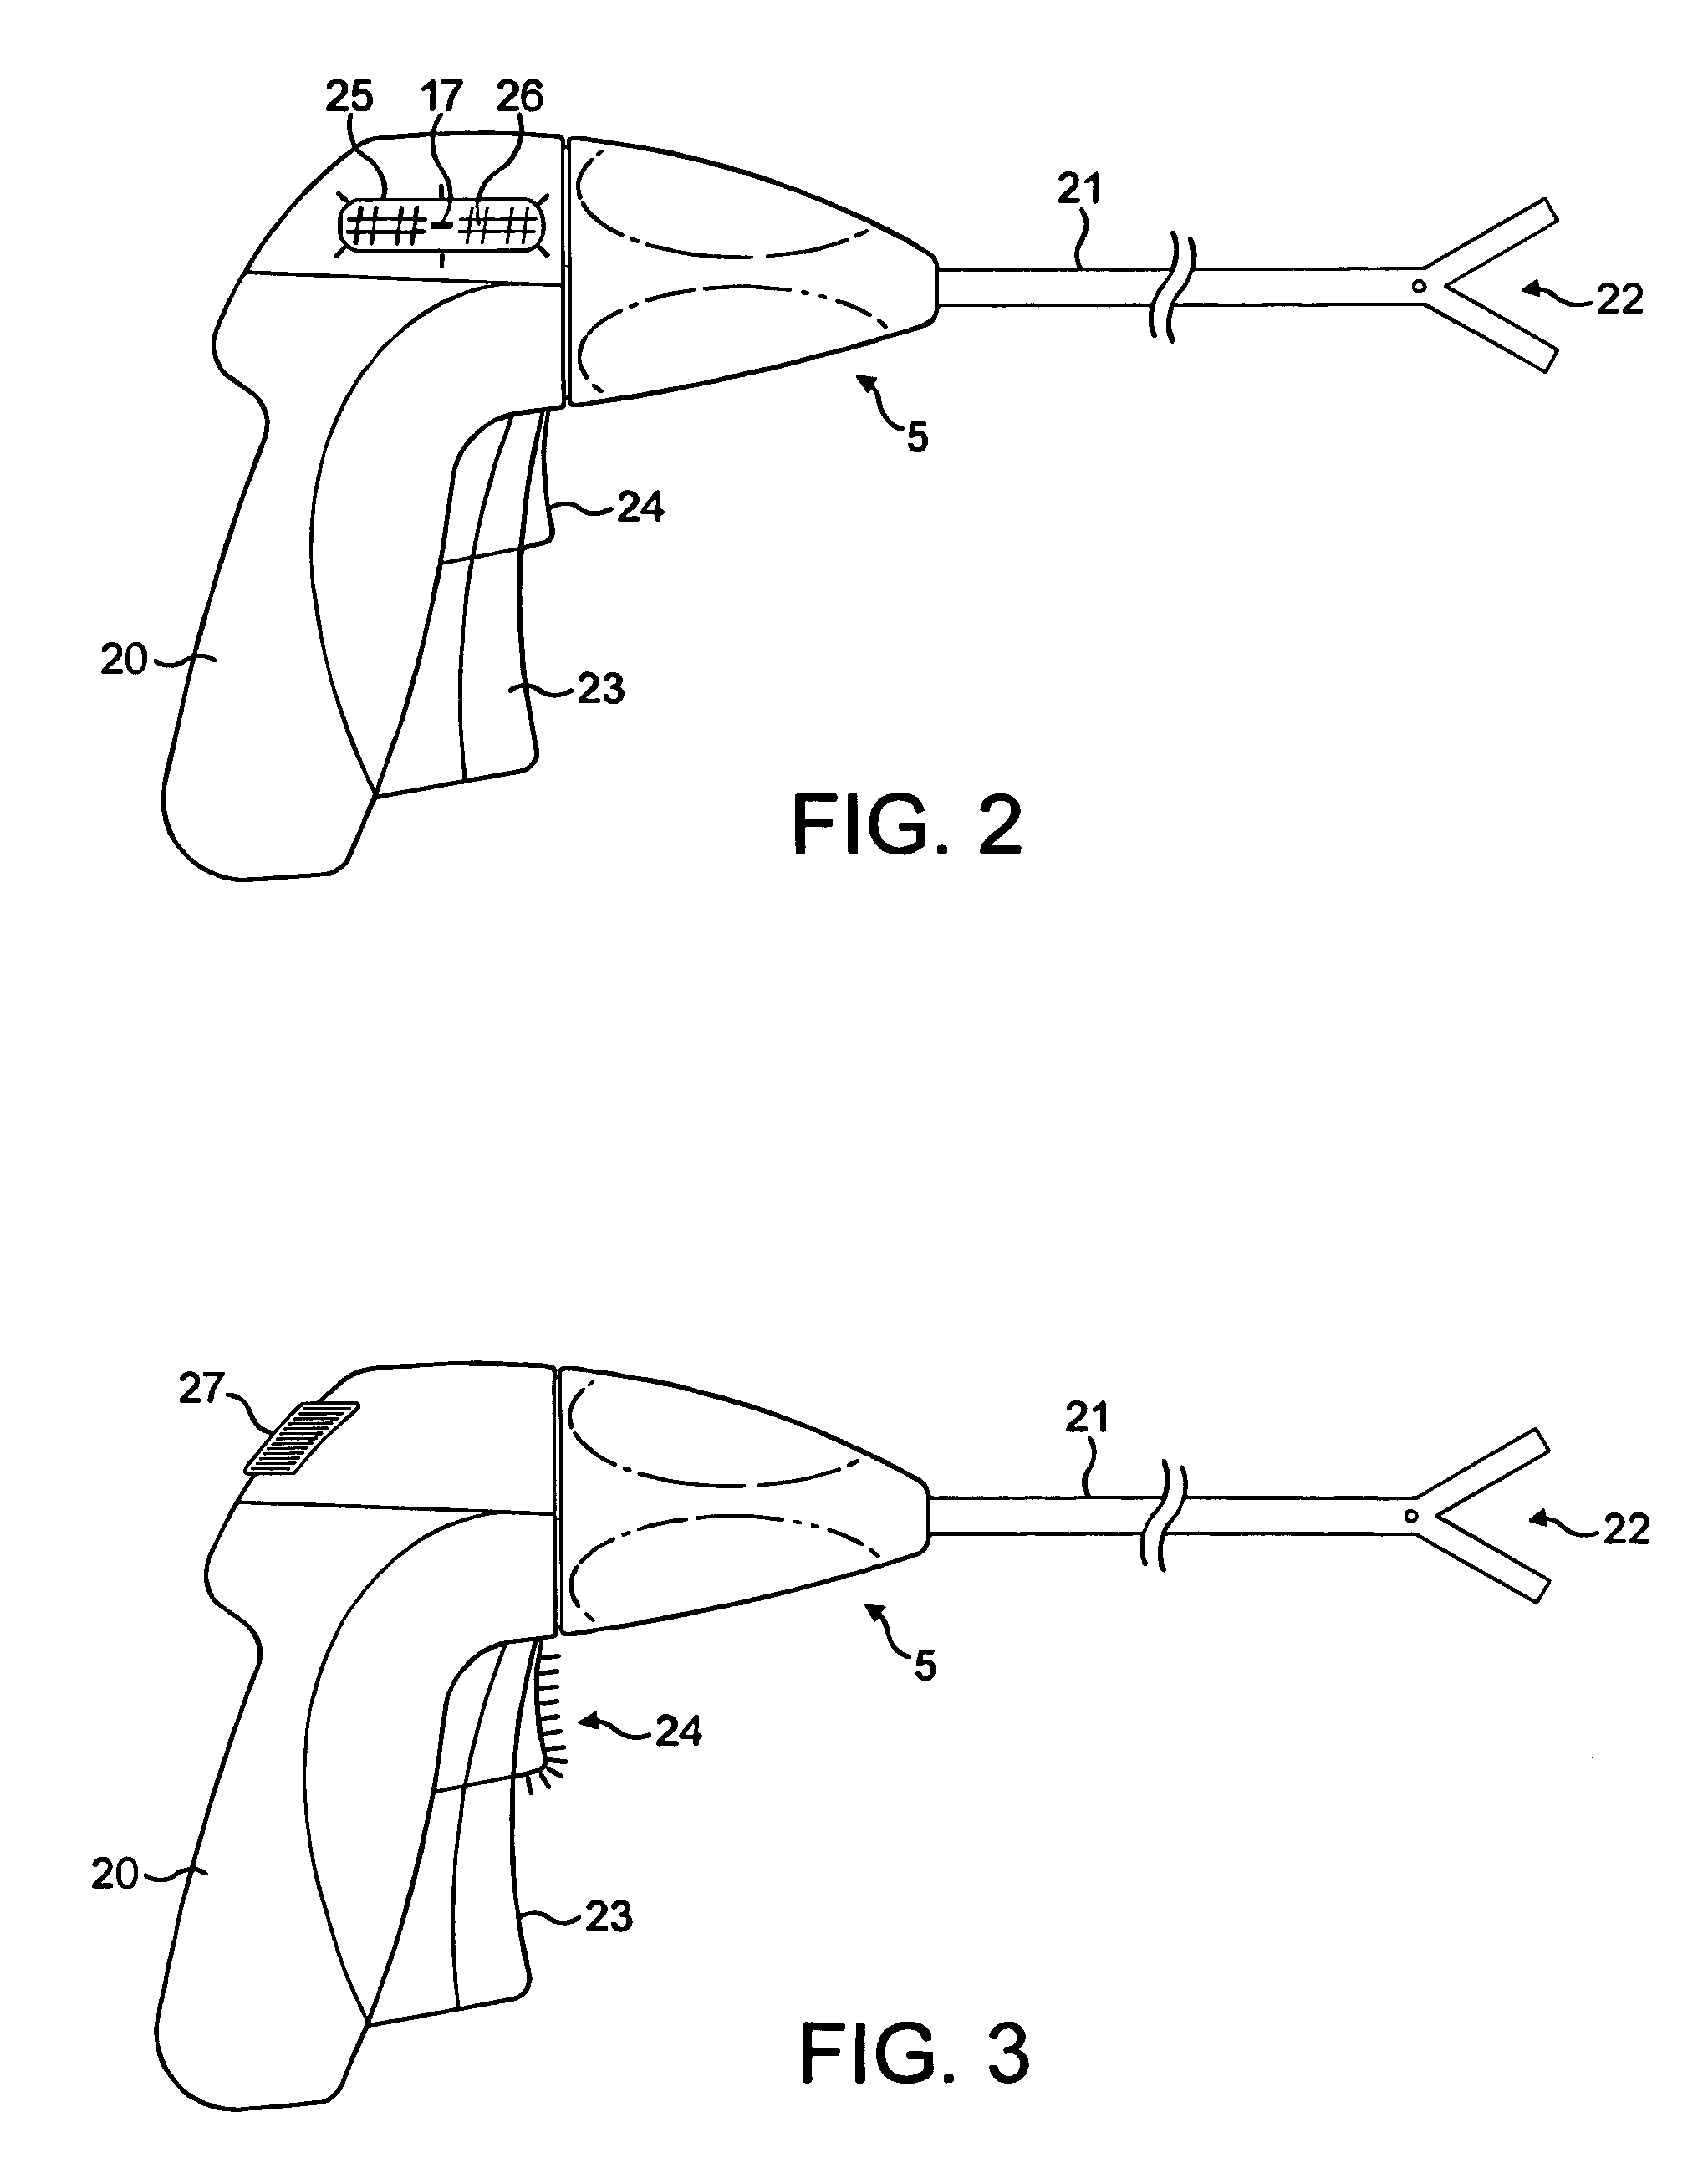 Electrosurgical system